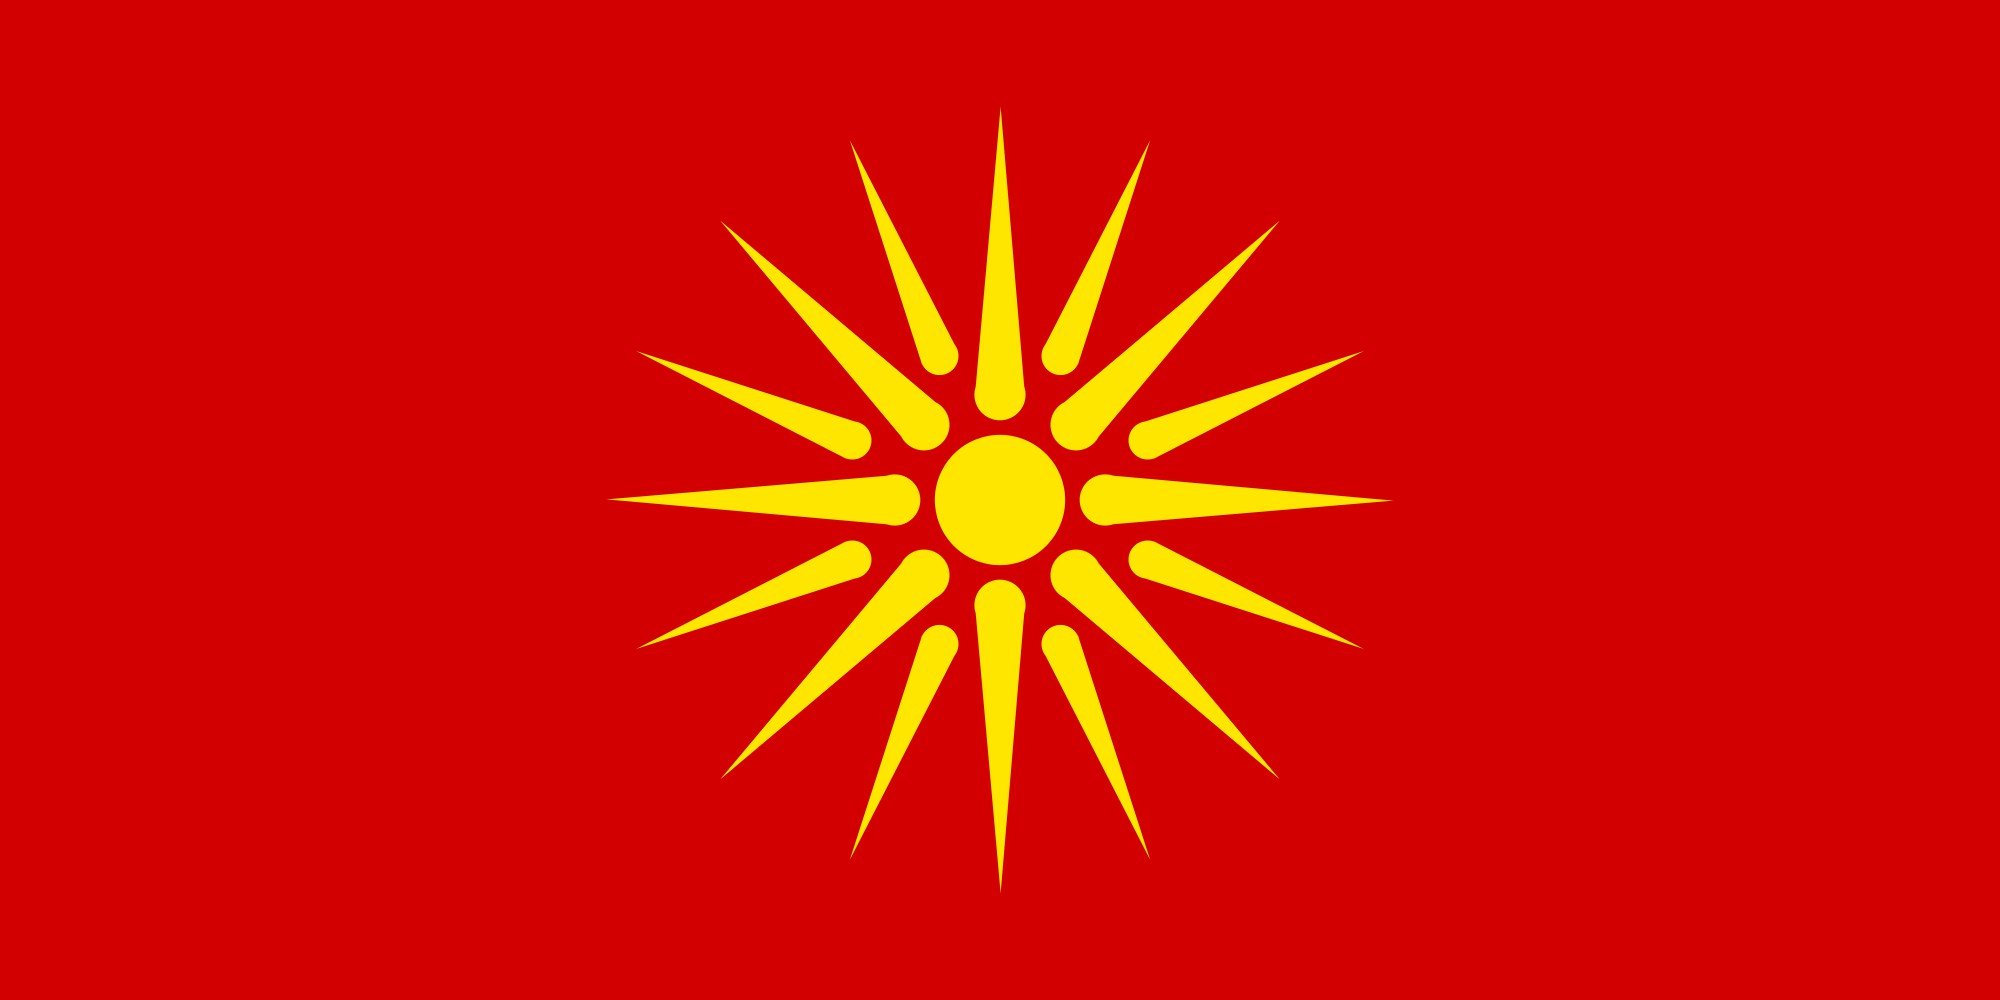 2000px flag, Of, The, Republic, Of, Macedonia, 1992 1995, Svg Wallpaper